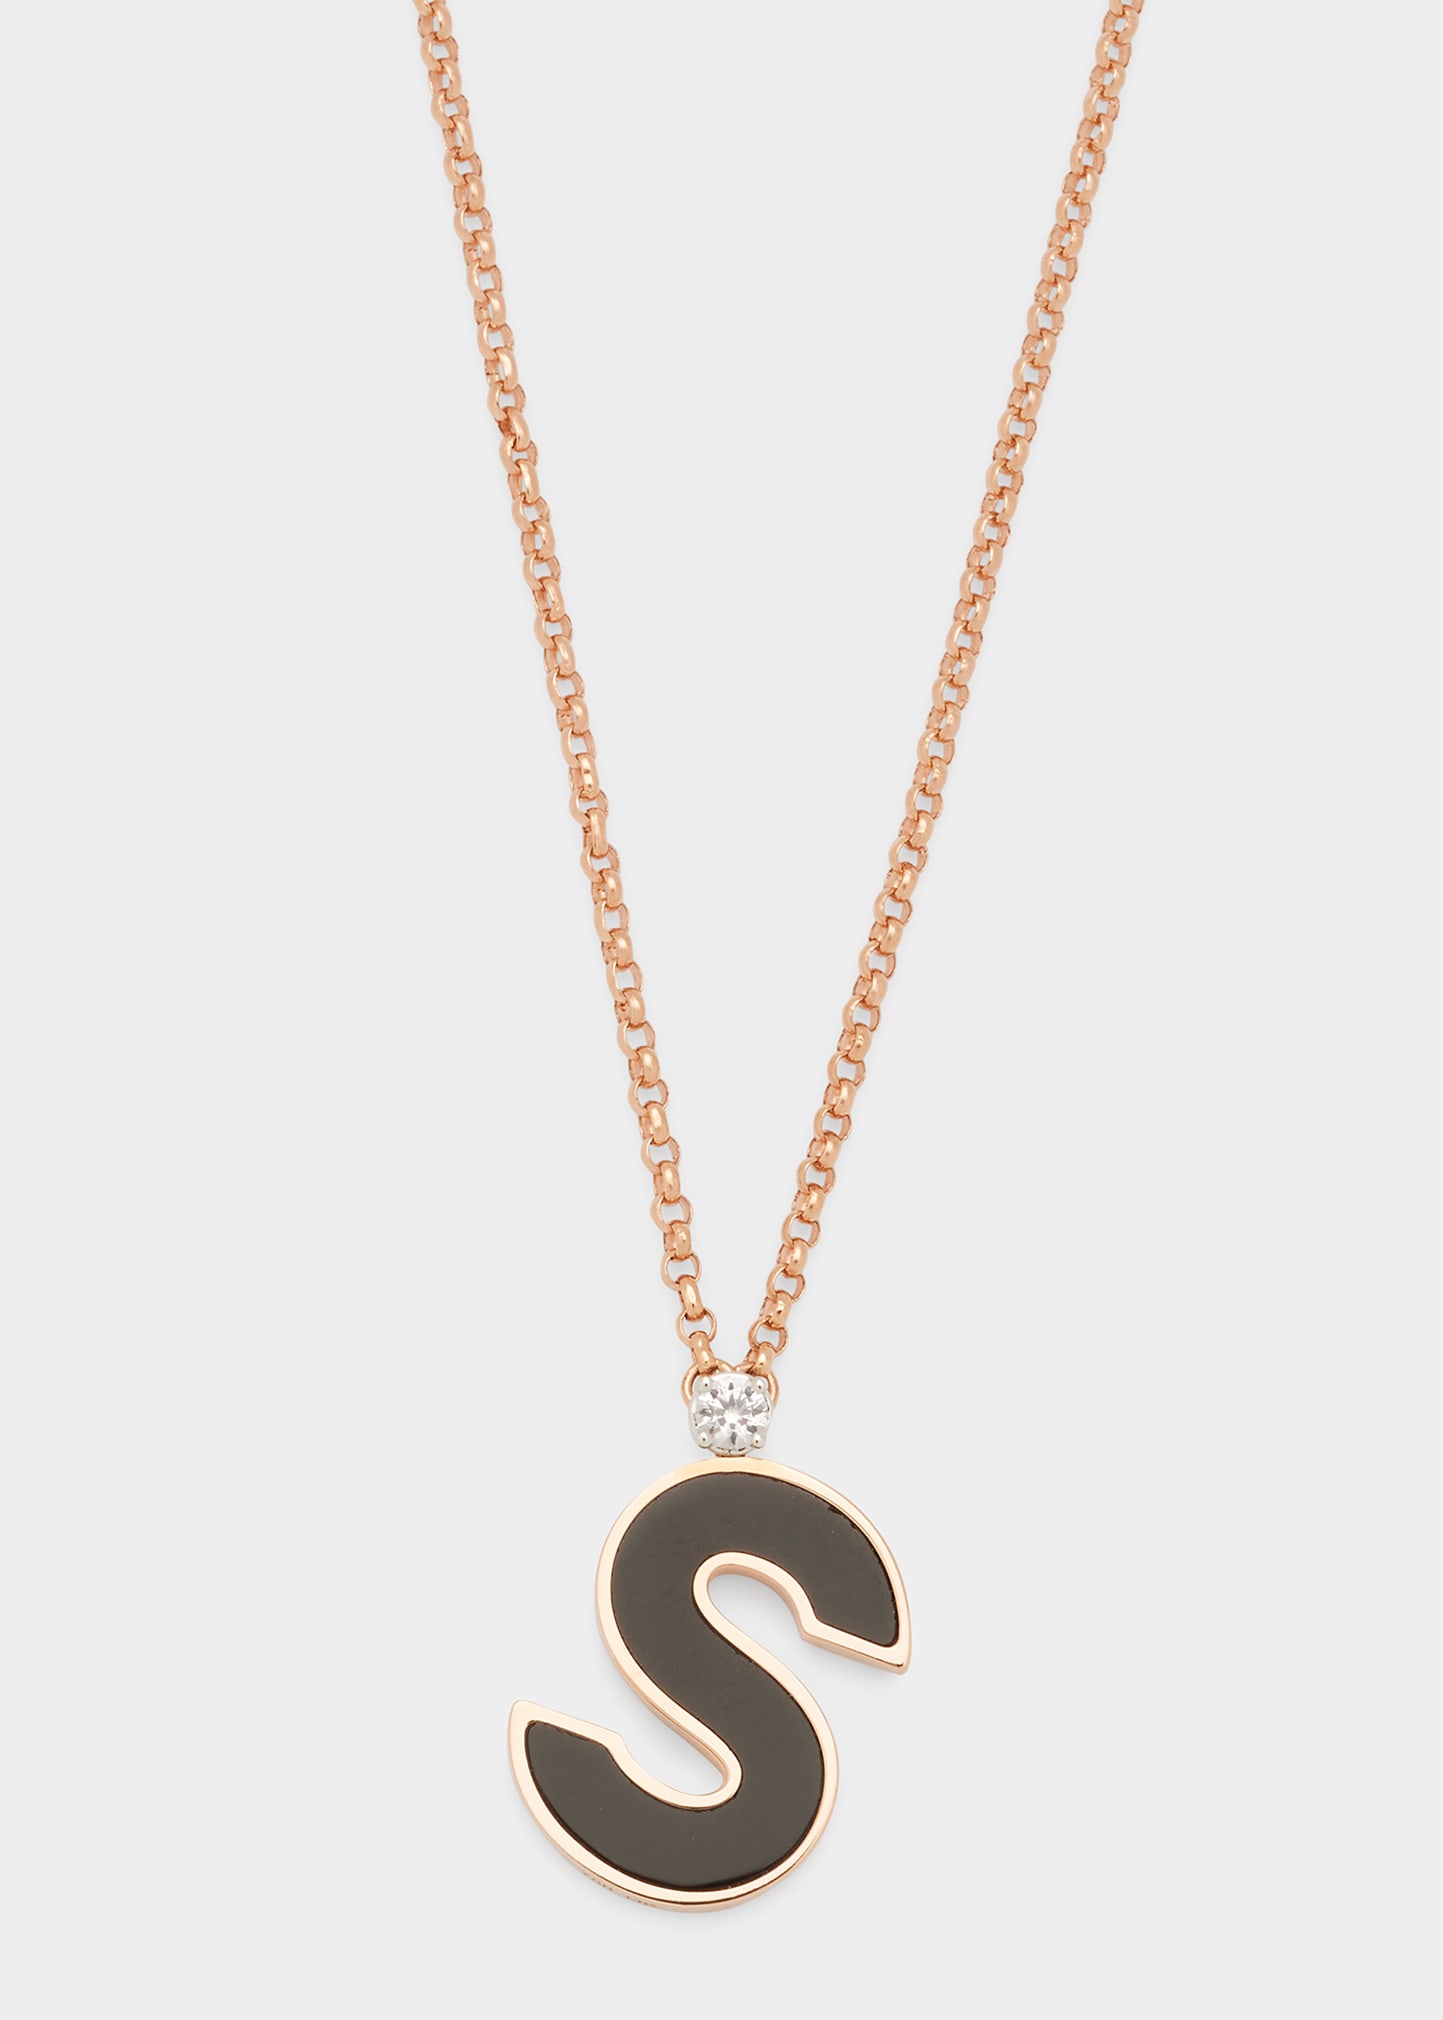 Rose Gold 'S' Letter Charm Necklace with Onyx and White Sapphire